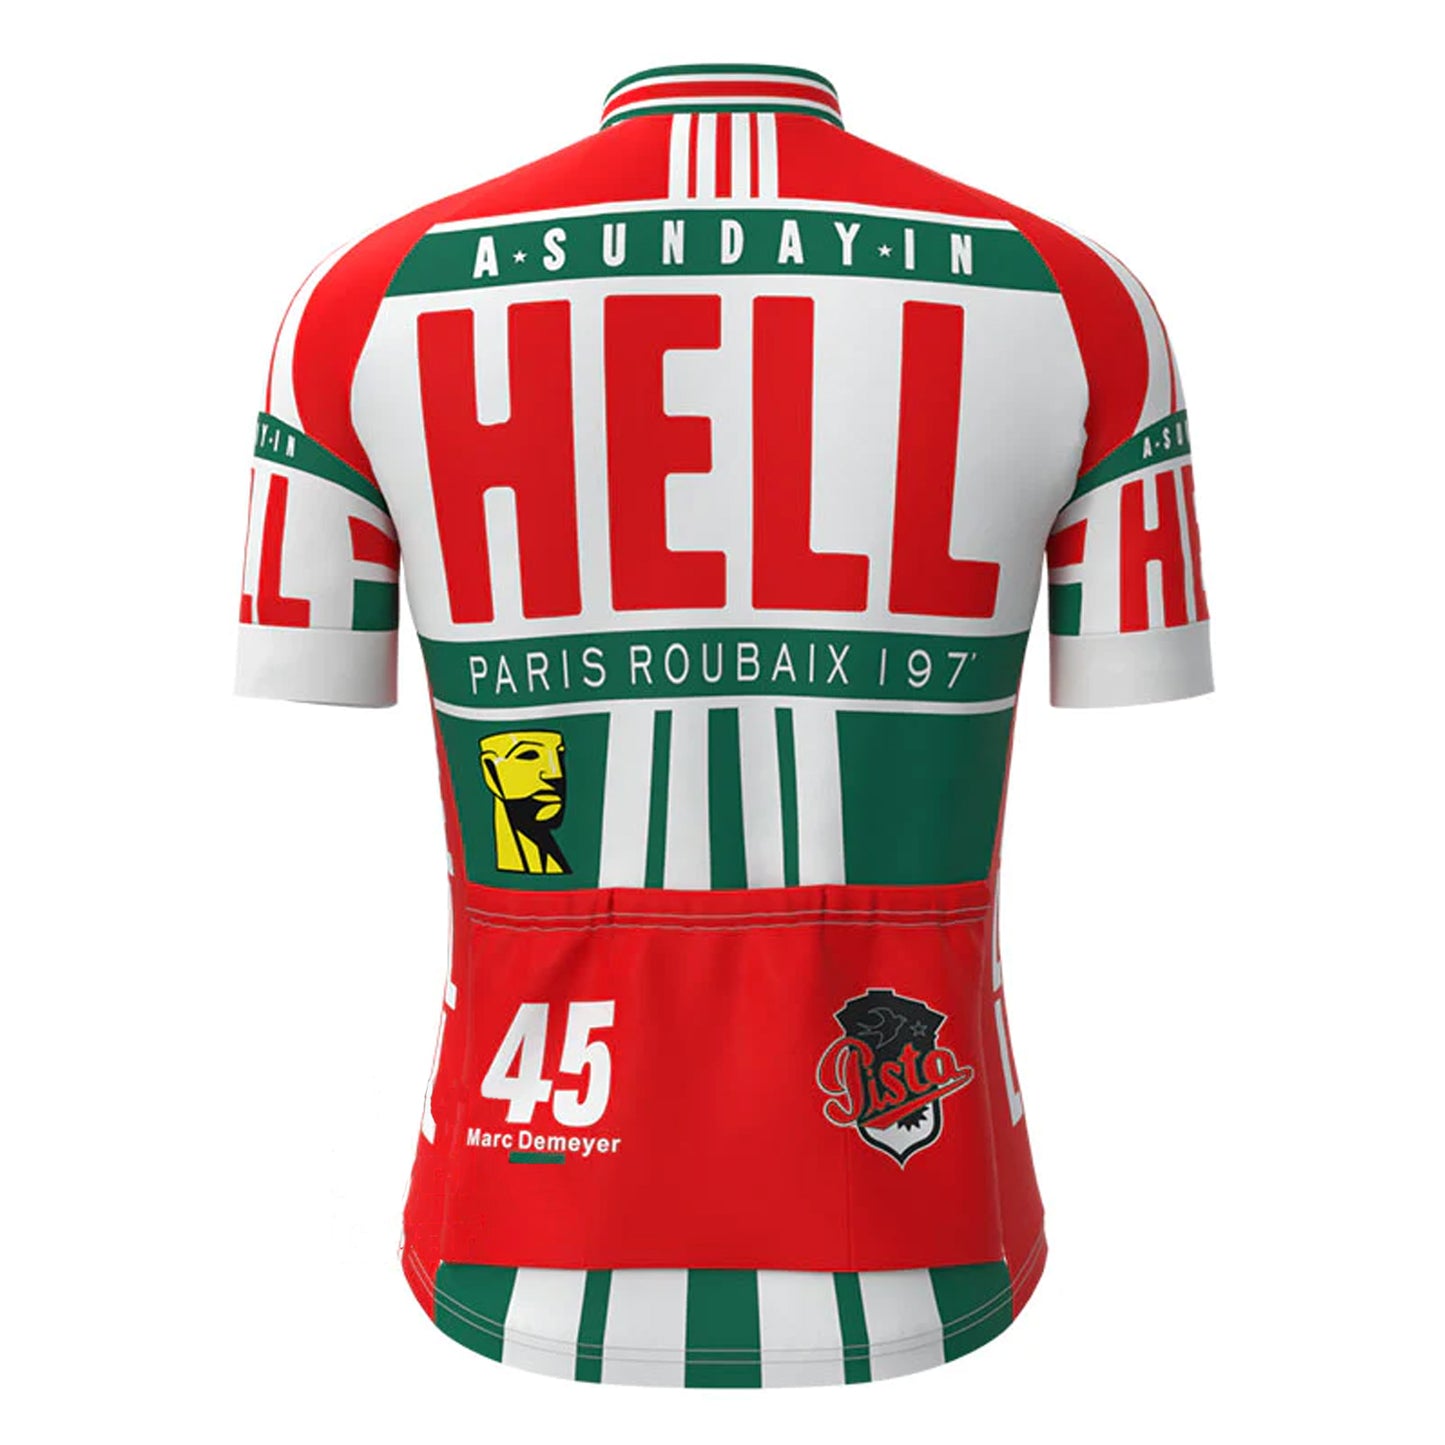 A Sunday in Hell Red Vintage Short Sleeve Cycling Jersey Top